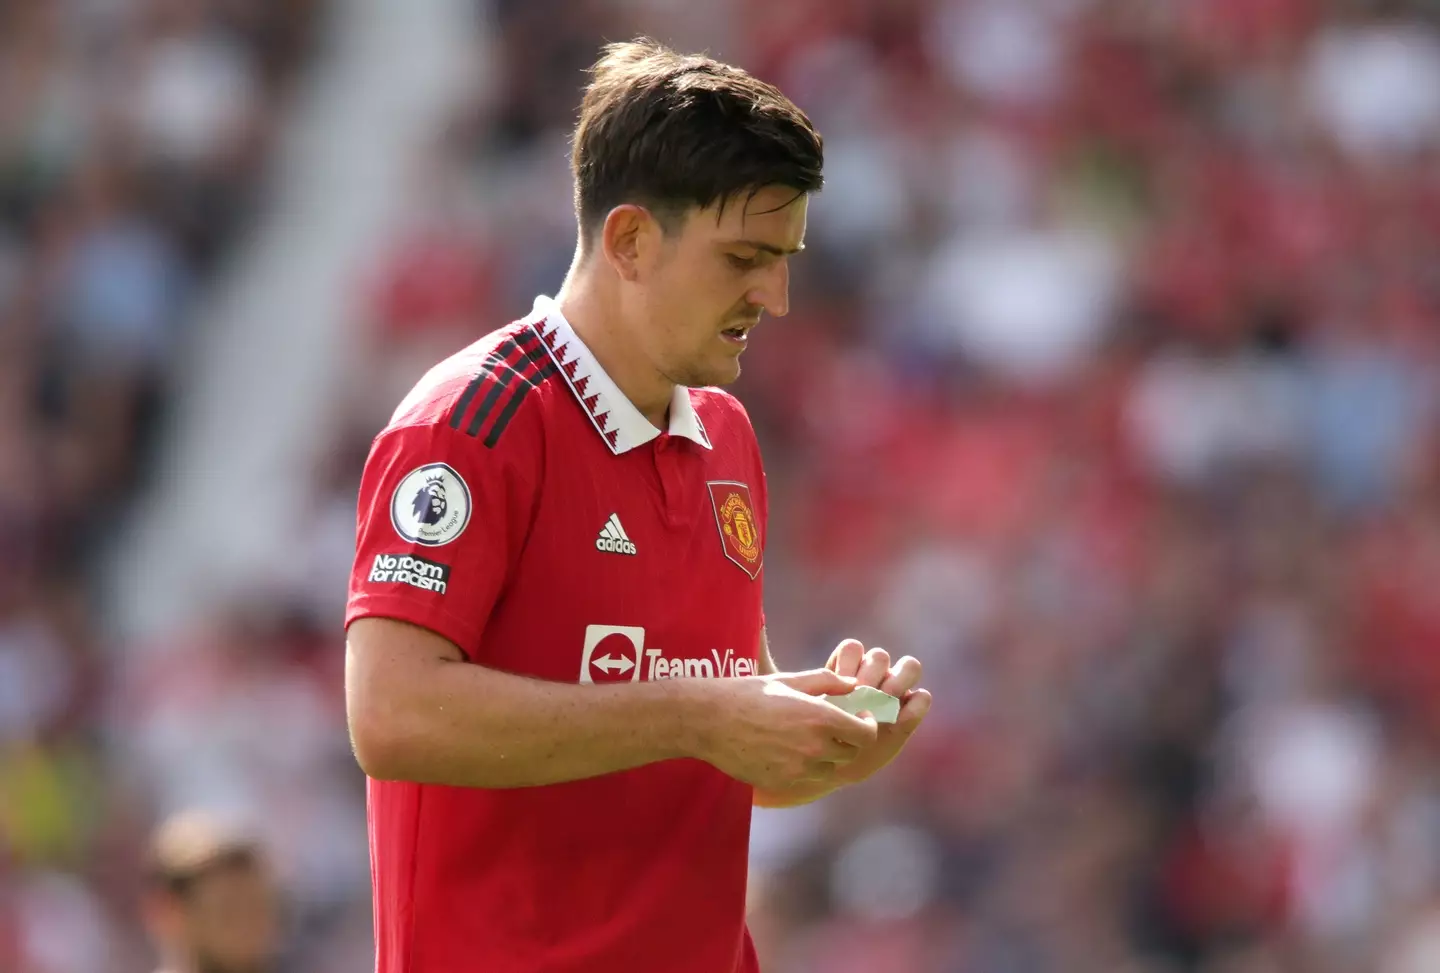 Maguire's been limited to appearances in the cups this season. (Image